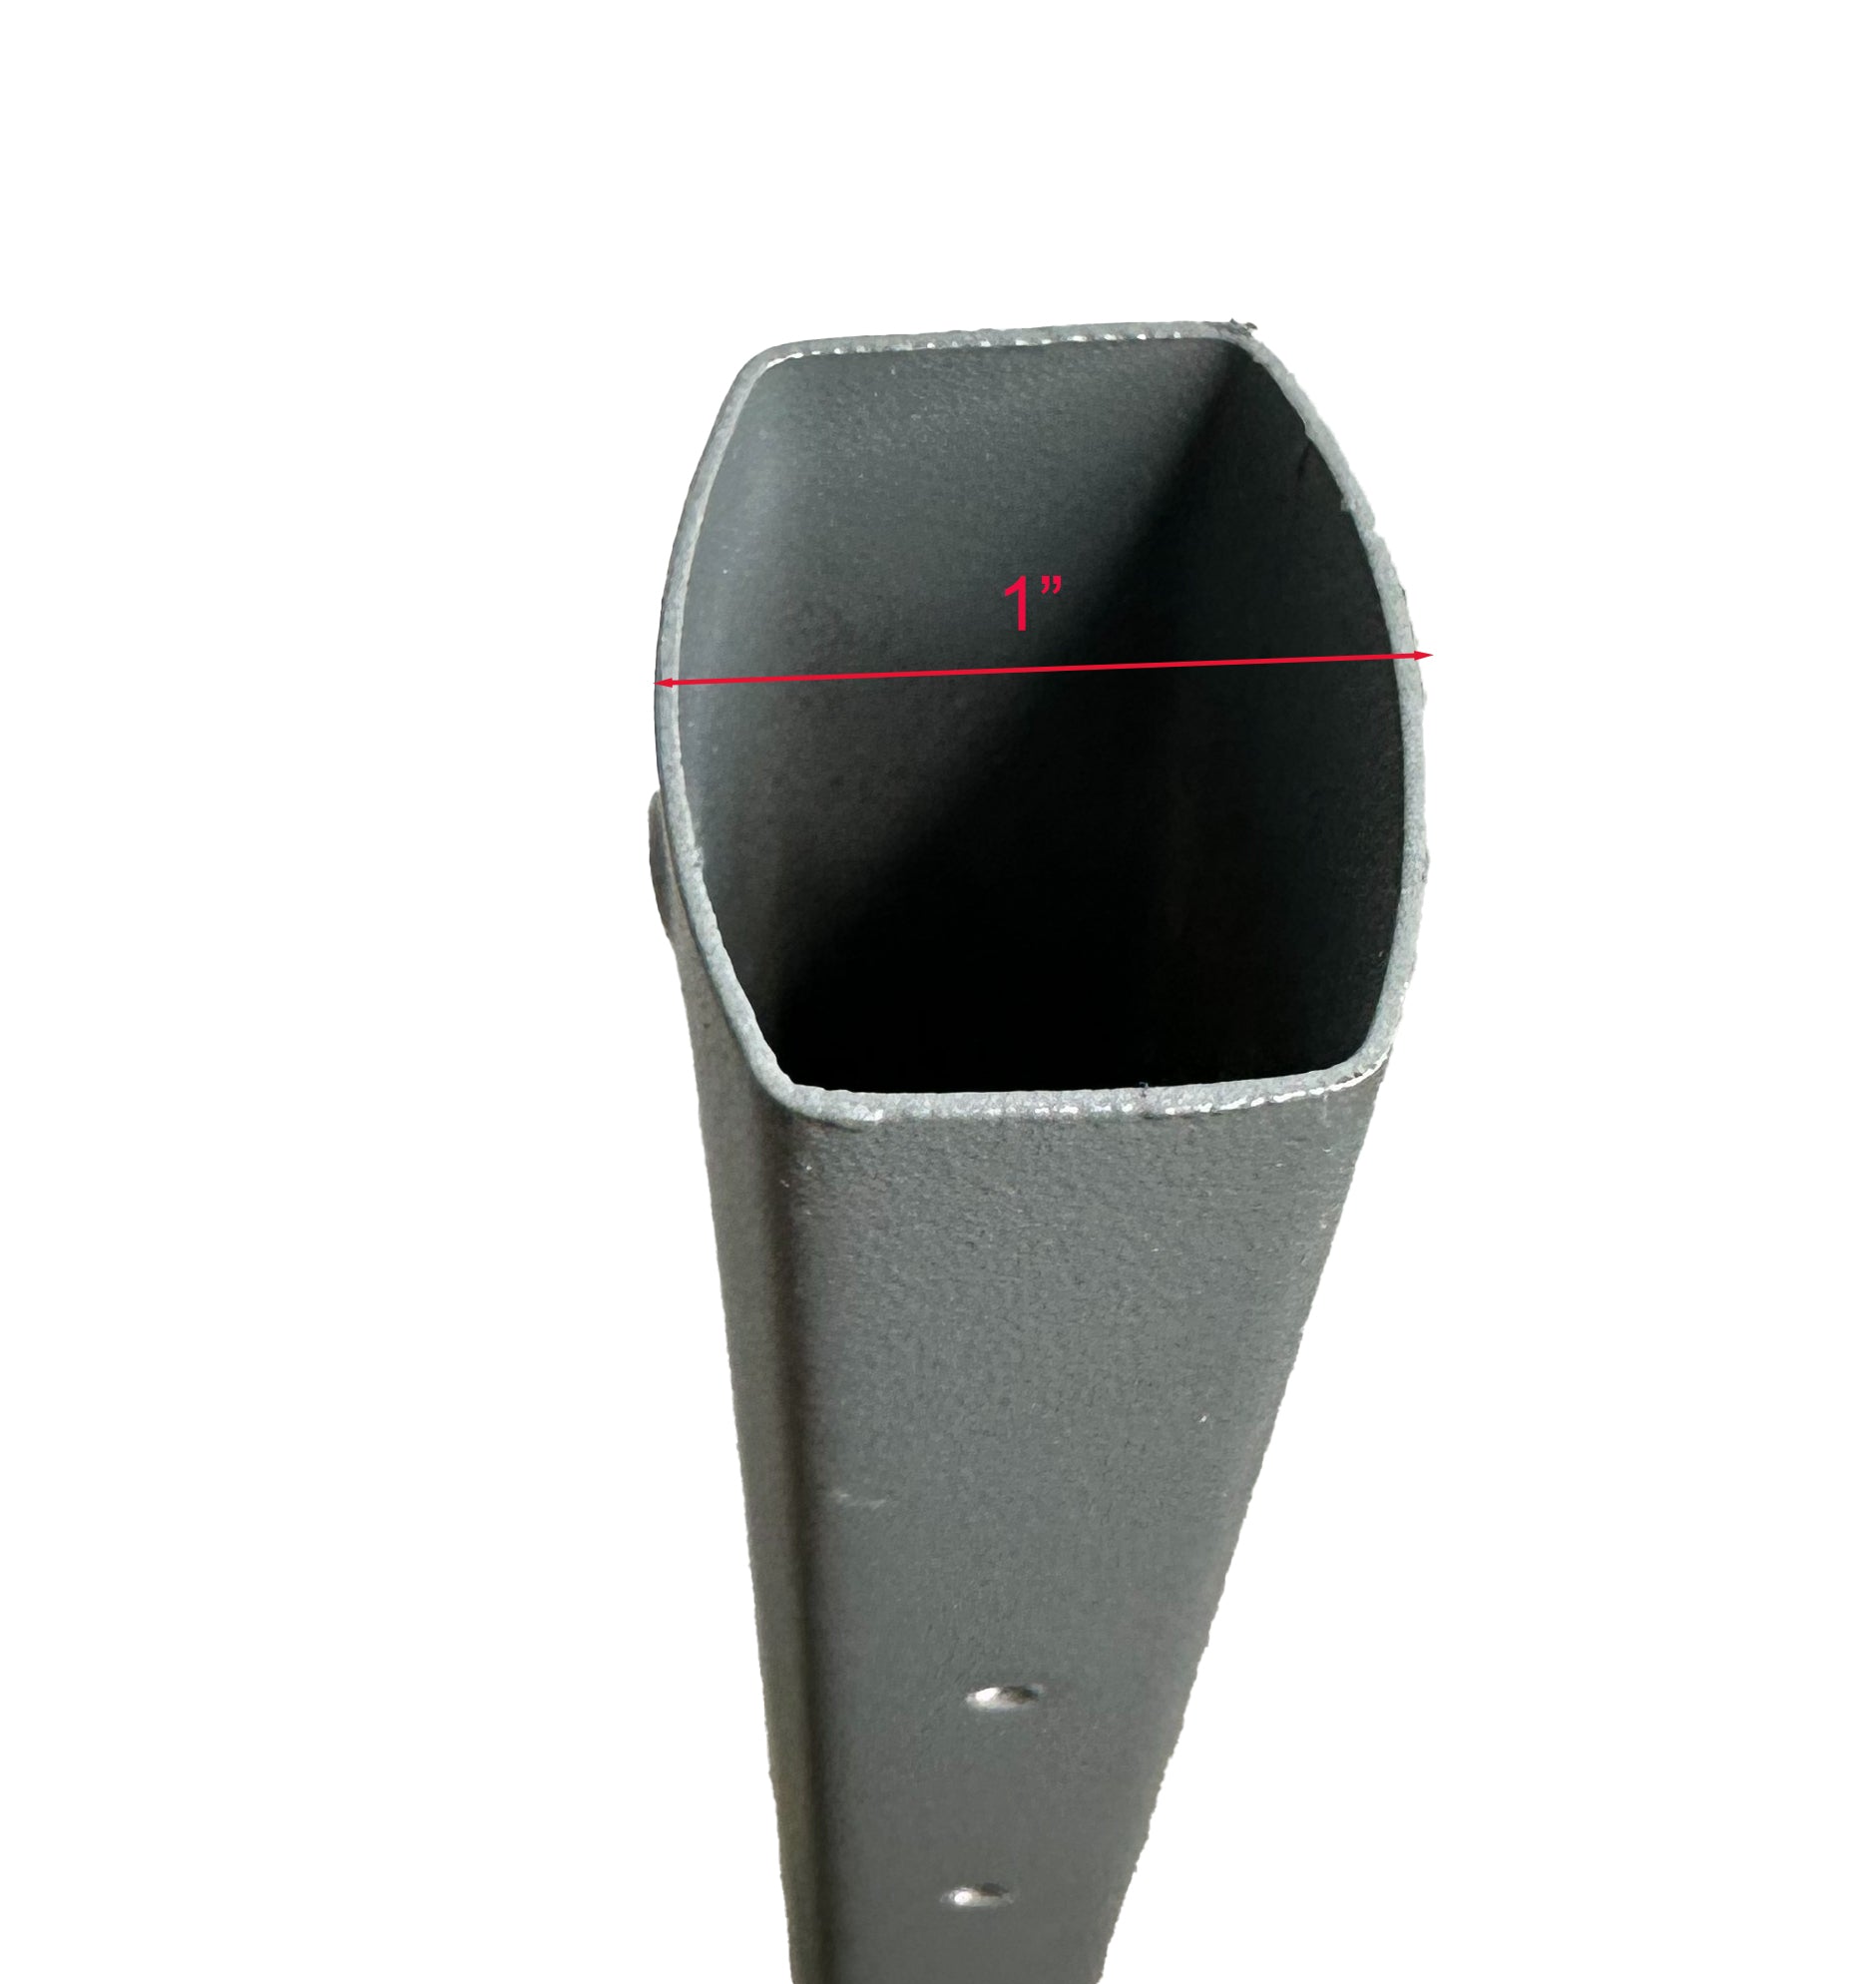 The image shows a close-up view of a dark gray, textured object with an oval opening. A red measurement line across the width of the opening indicates a dimension of 1 inch. The object appears to be made of a thick material, possibly metal or hard plastic, and has a series of small round holes drilled along one side. The background is plain and light-colored, providing a contrast that highlights the object's opening and the red measurement line.